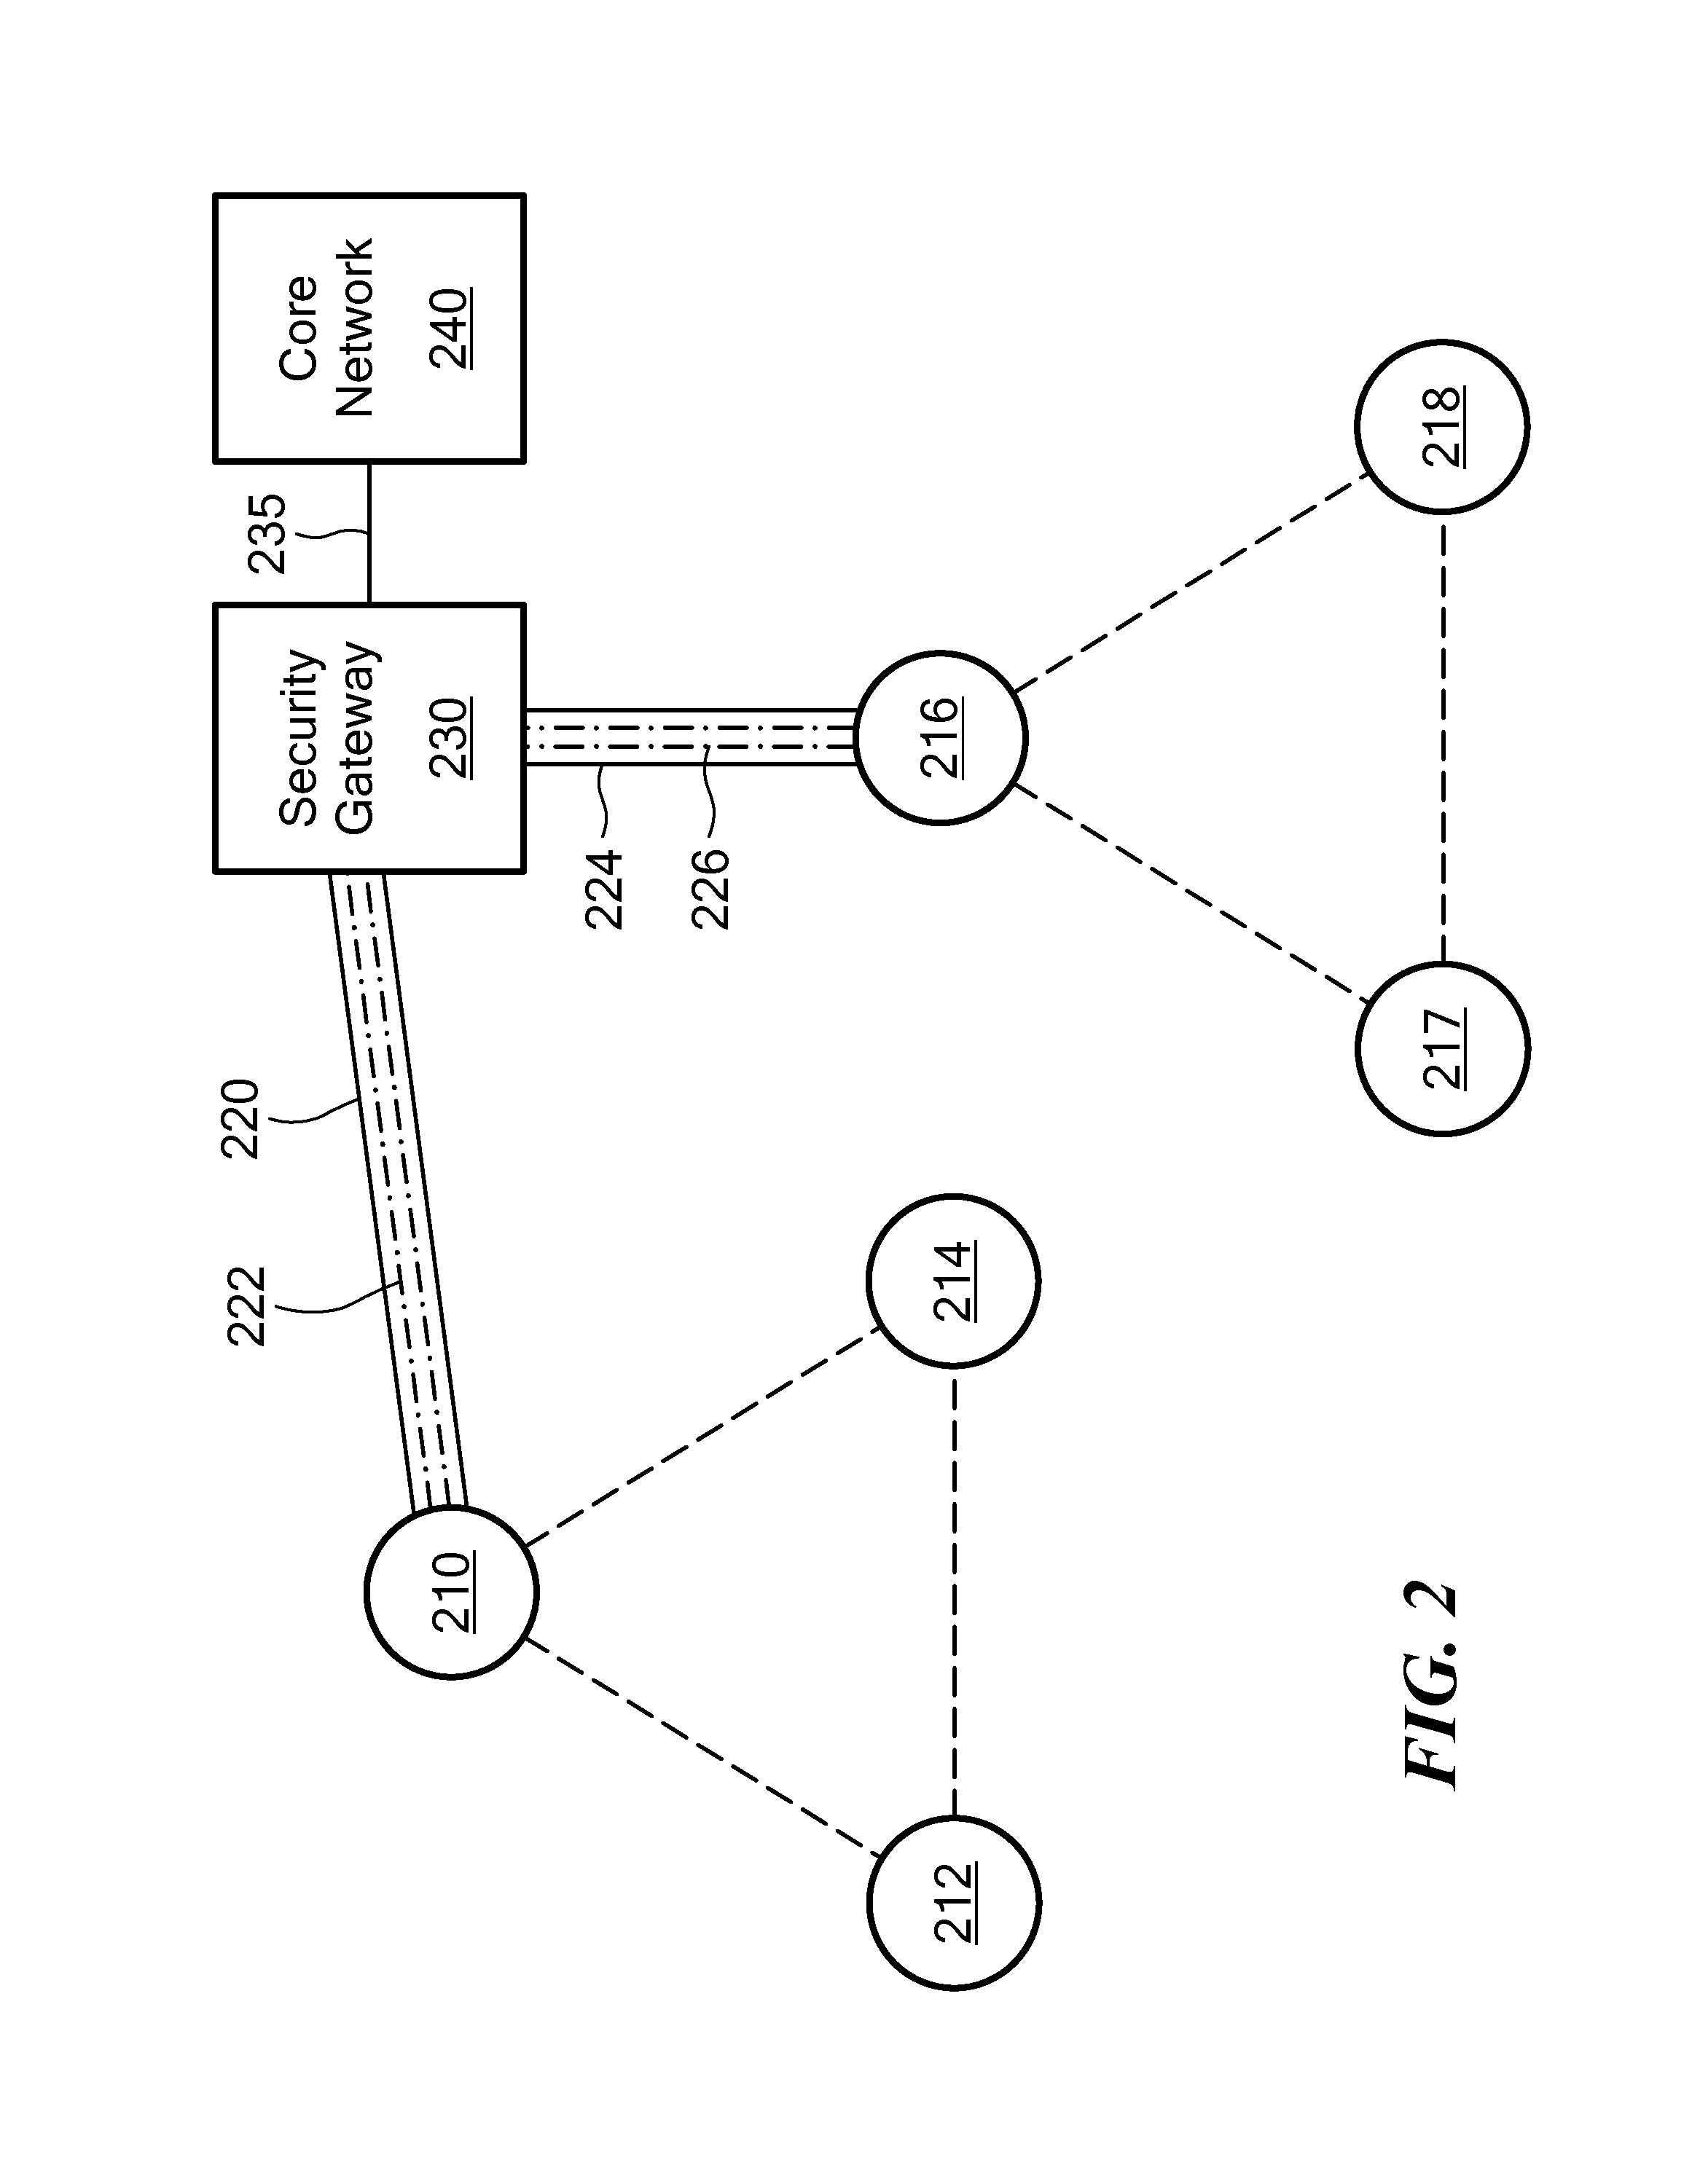 Method of connecting security gateway to mesh network